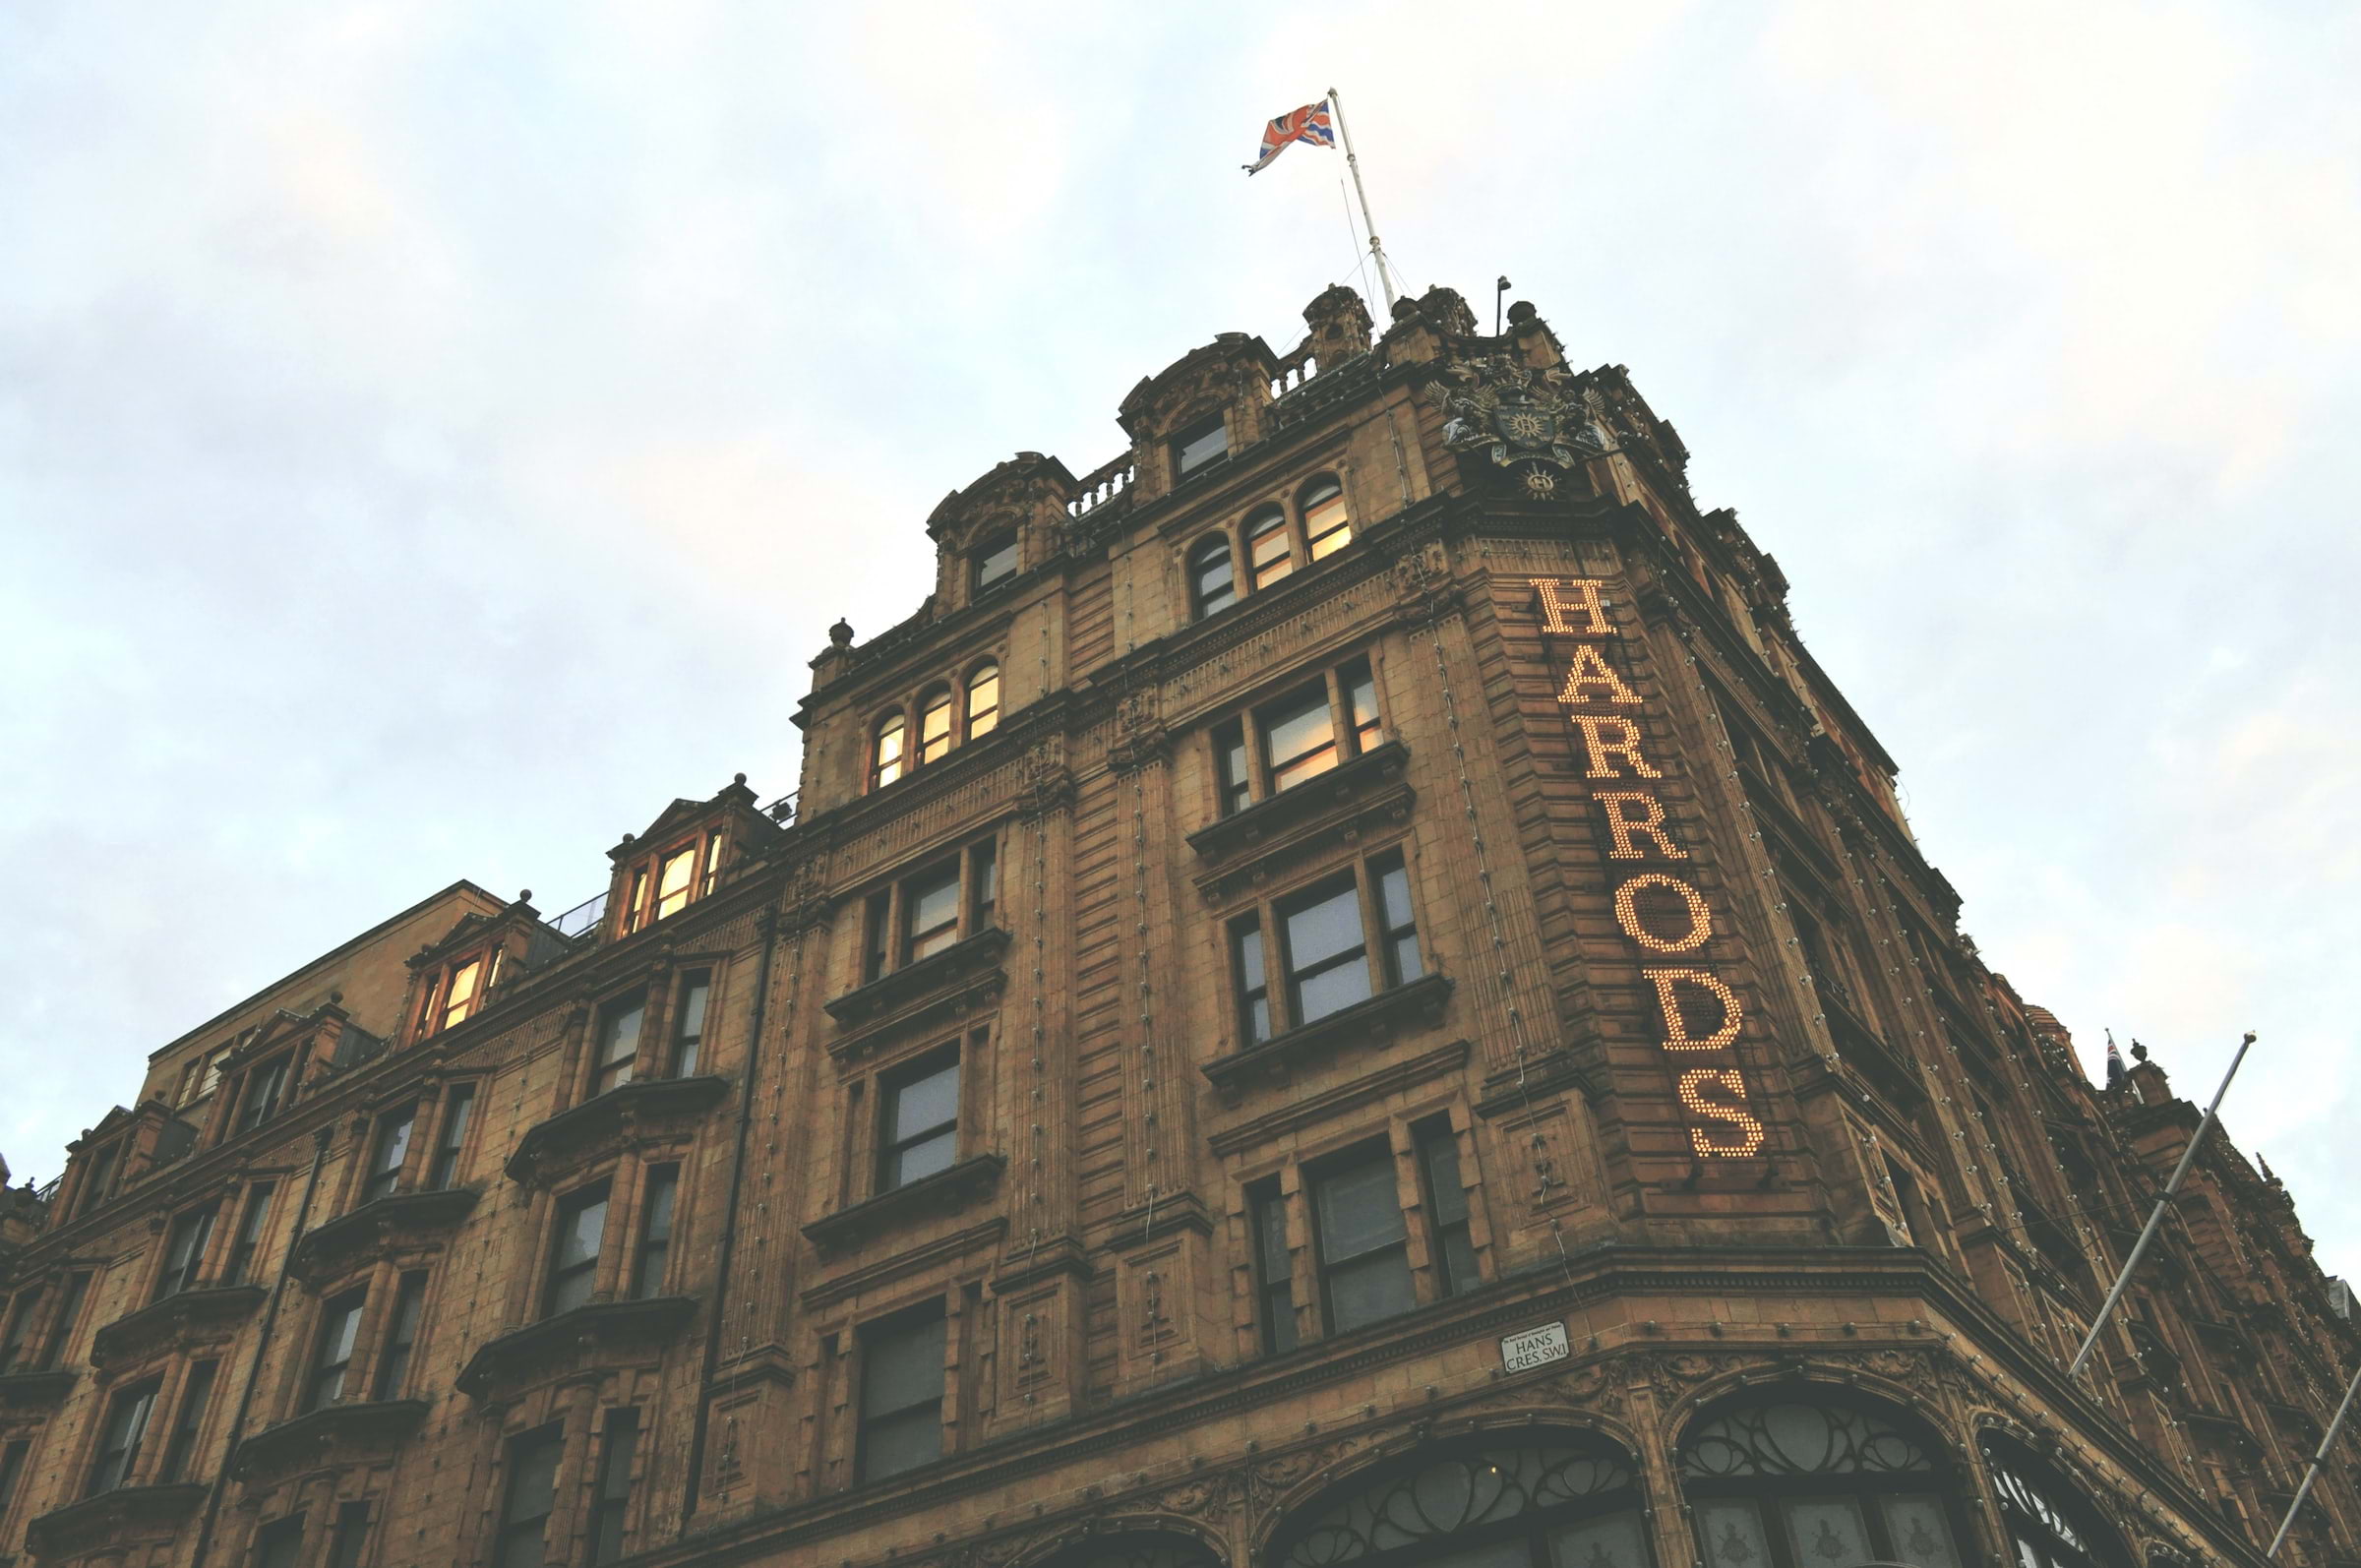 Guide to department stores in London